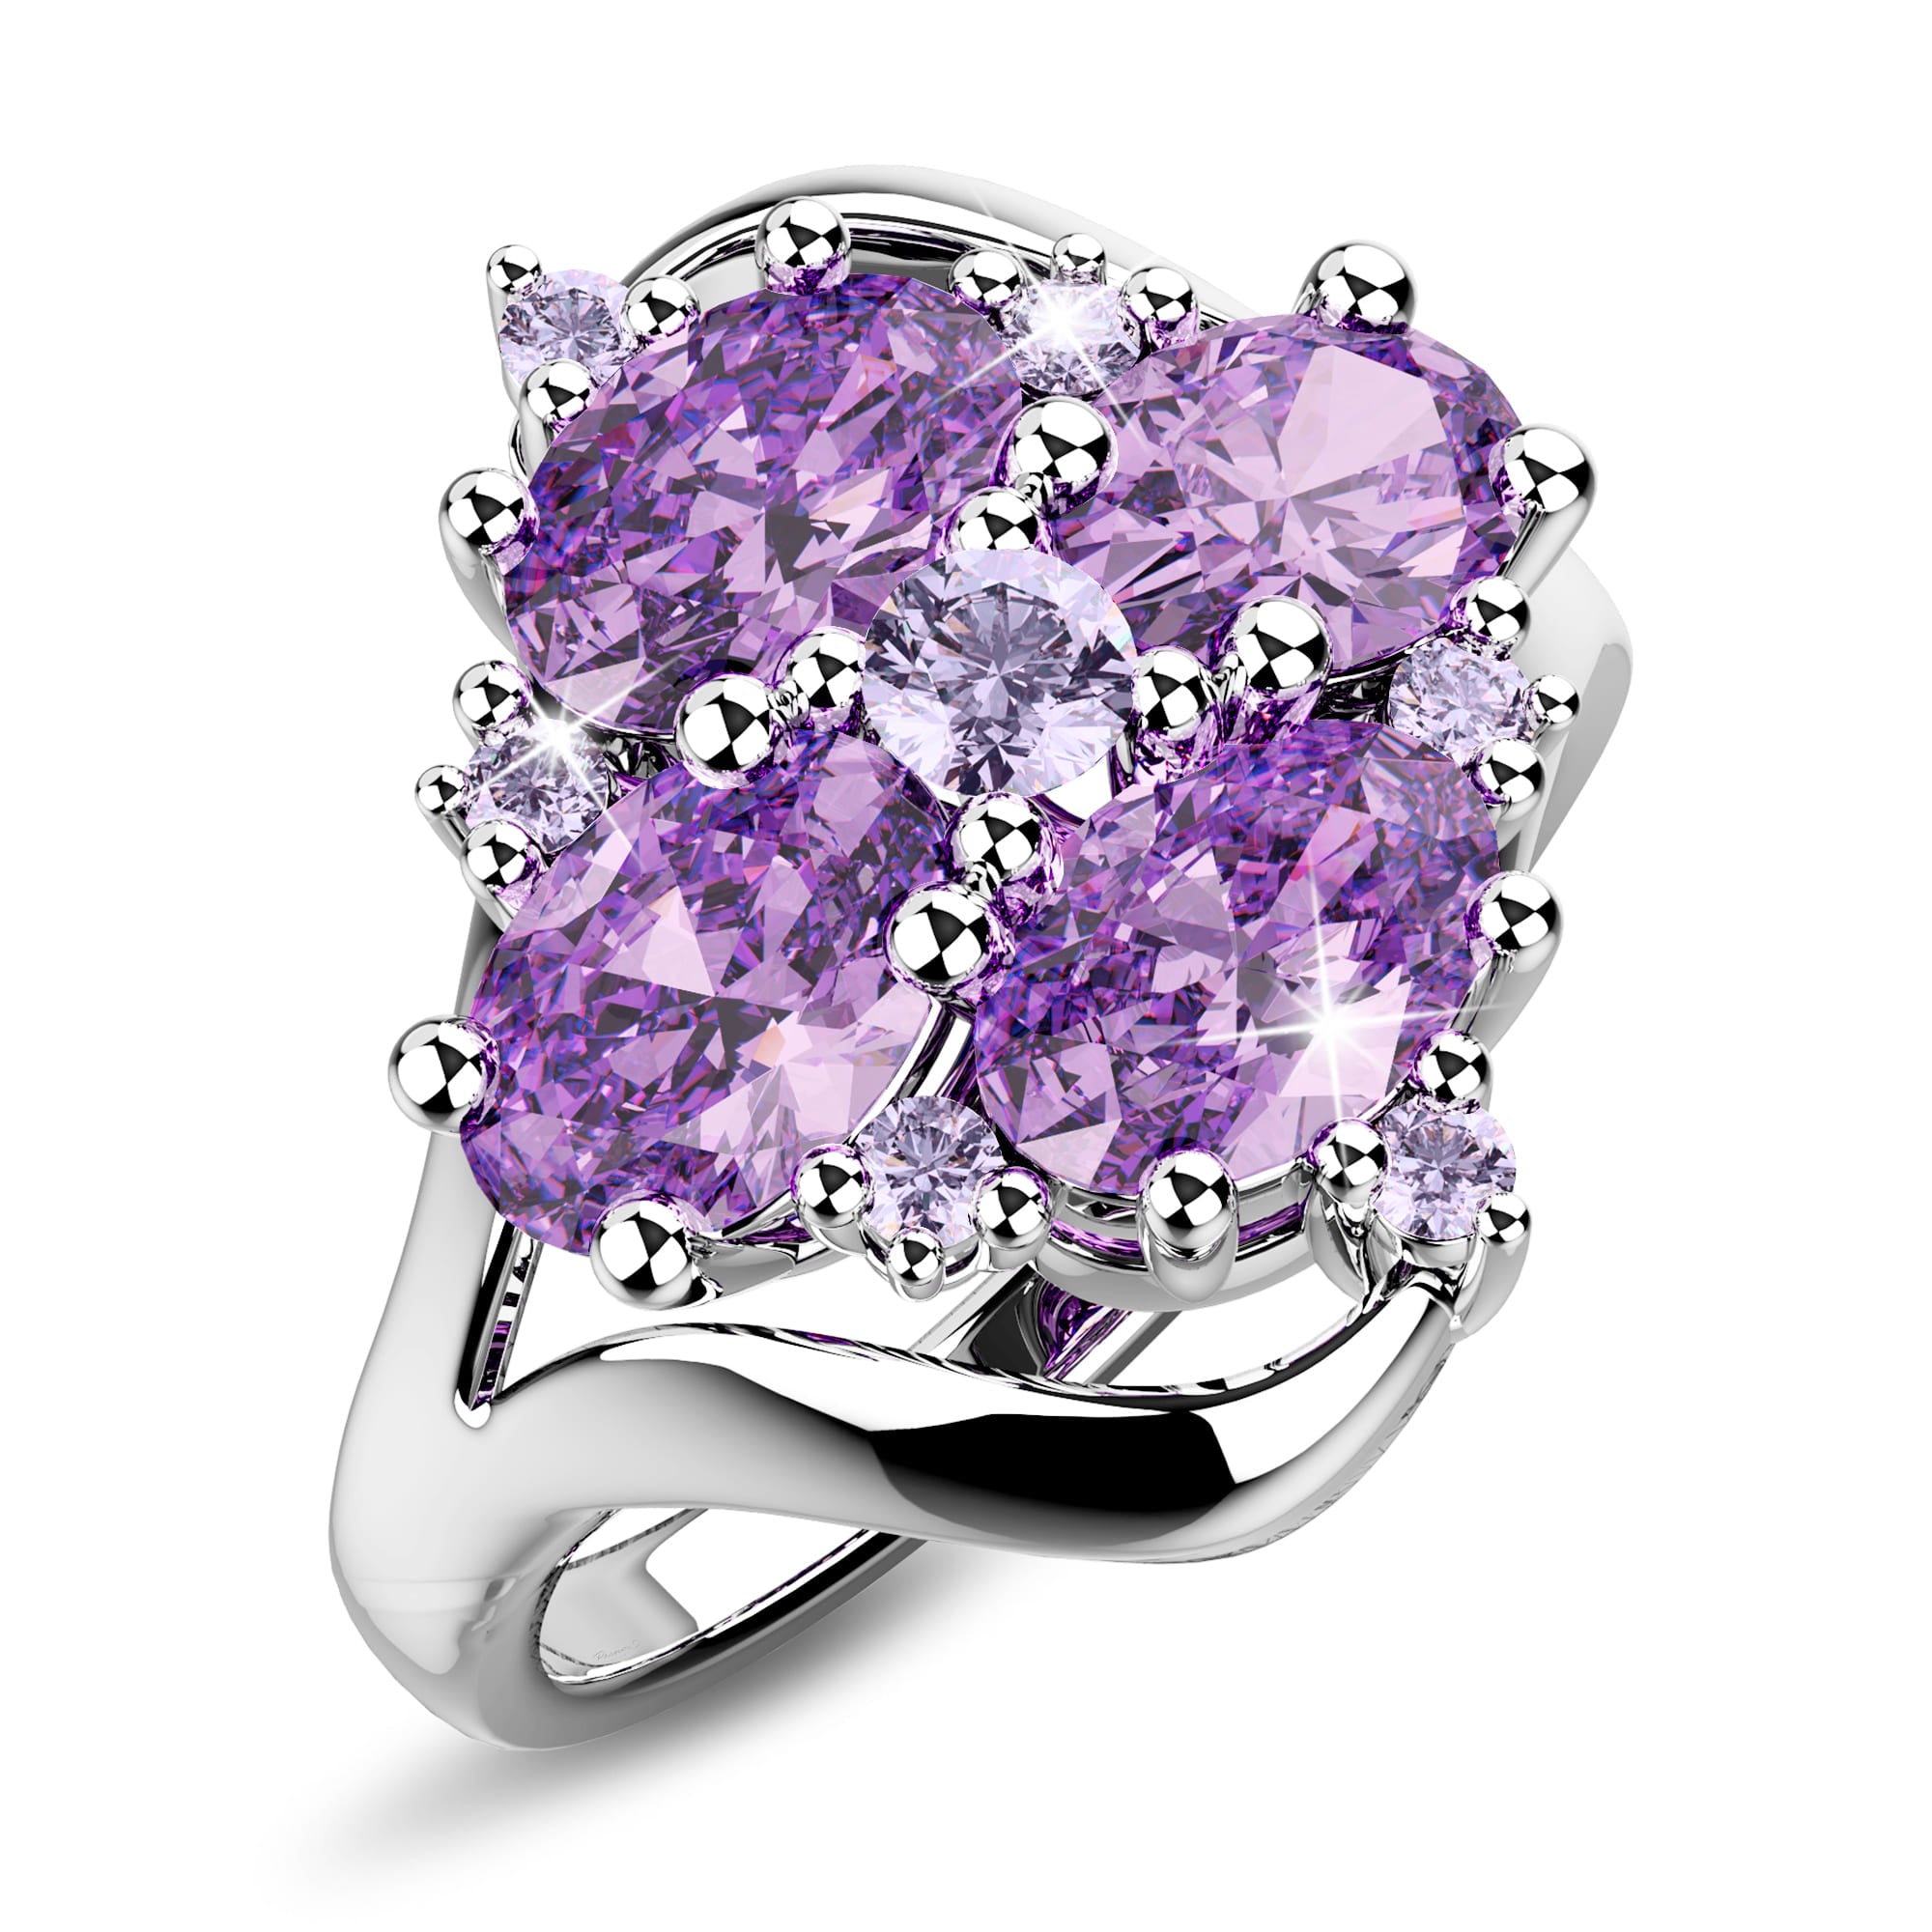 Solid Sterling Silver Amethyst Ring